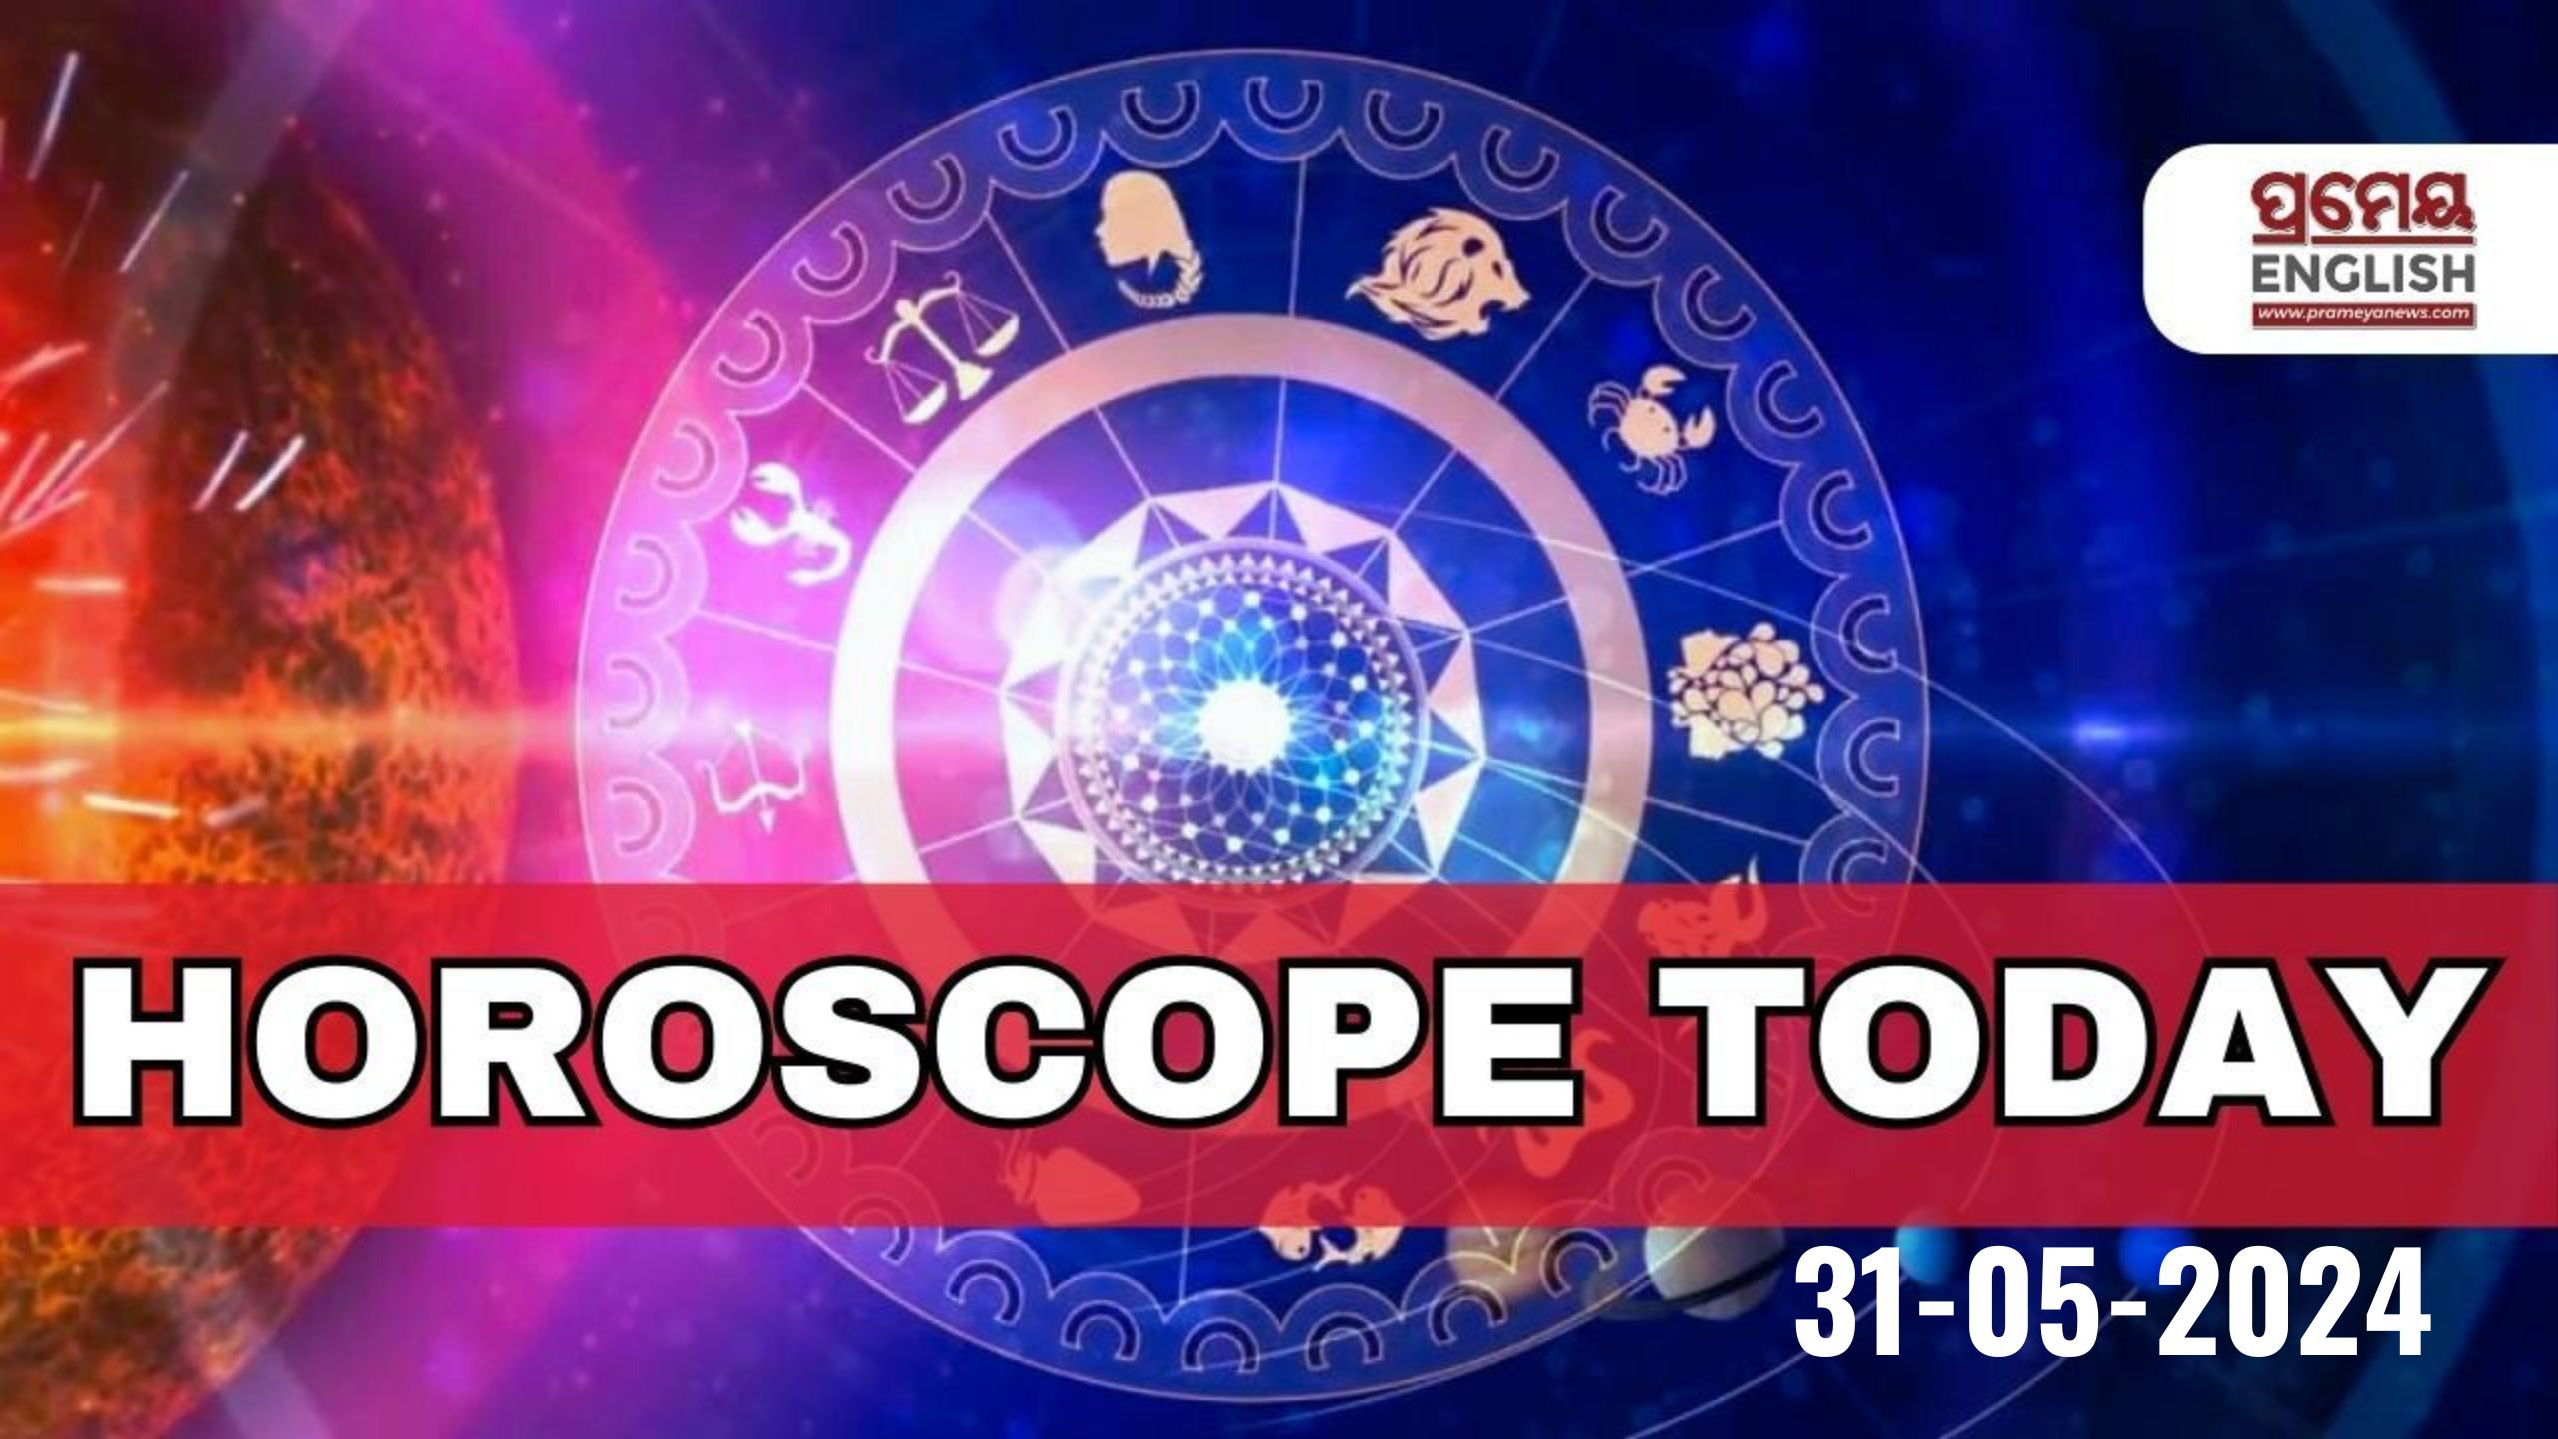 Horoscope Today: Astrological prediction for May 31, 2024